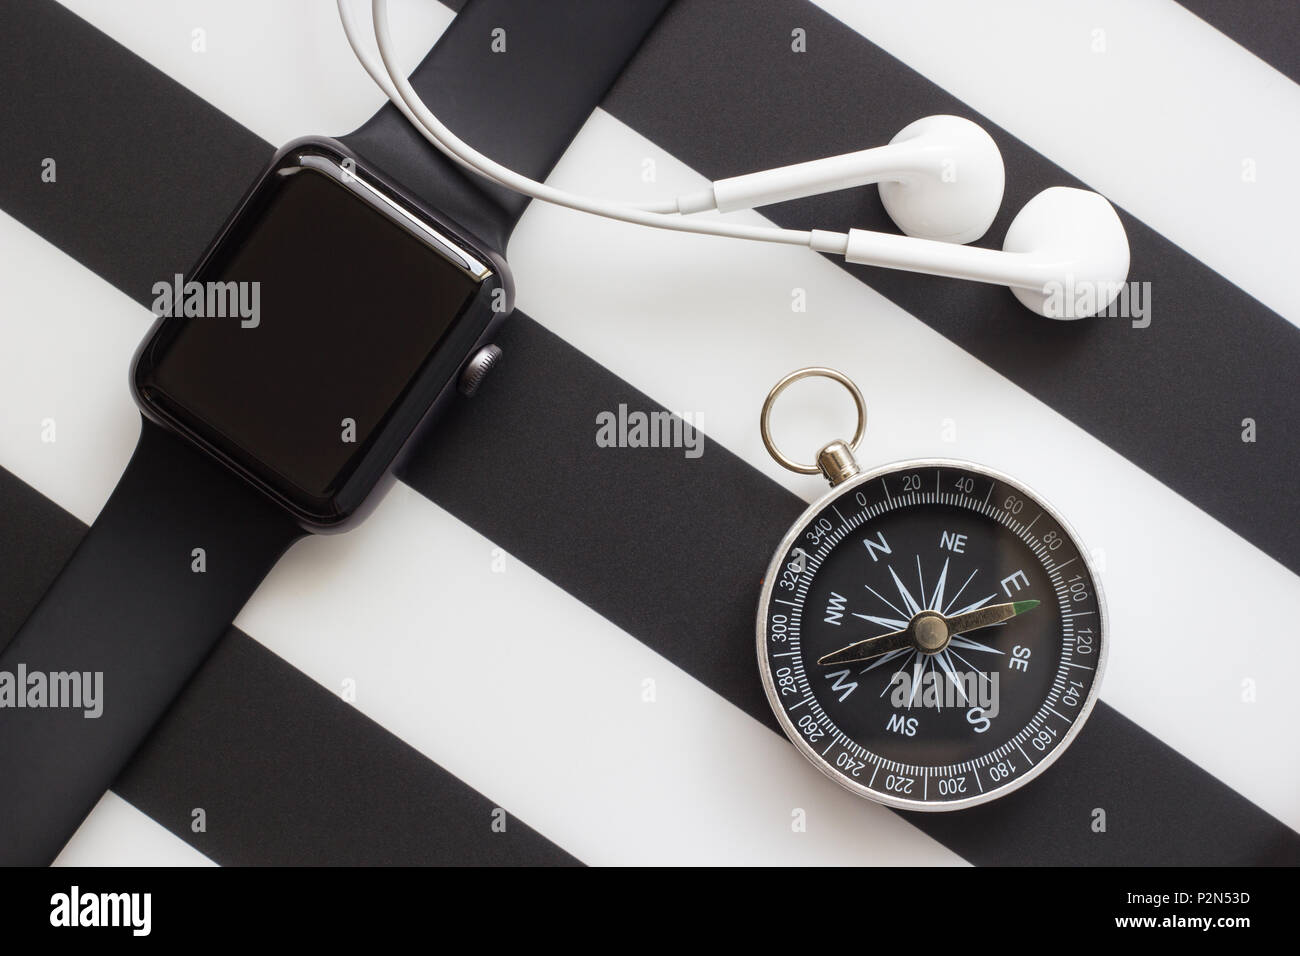 clock, headphones and compass on a black and white background Stock Photo